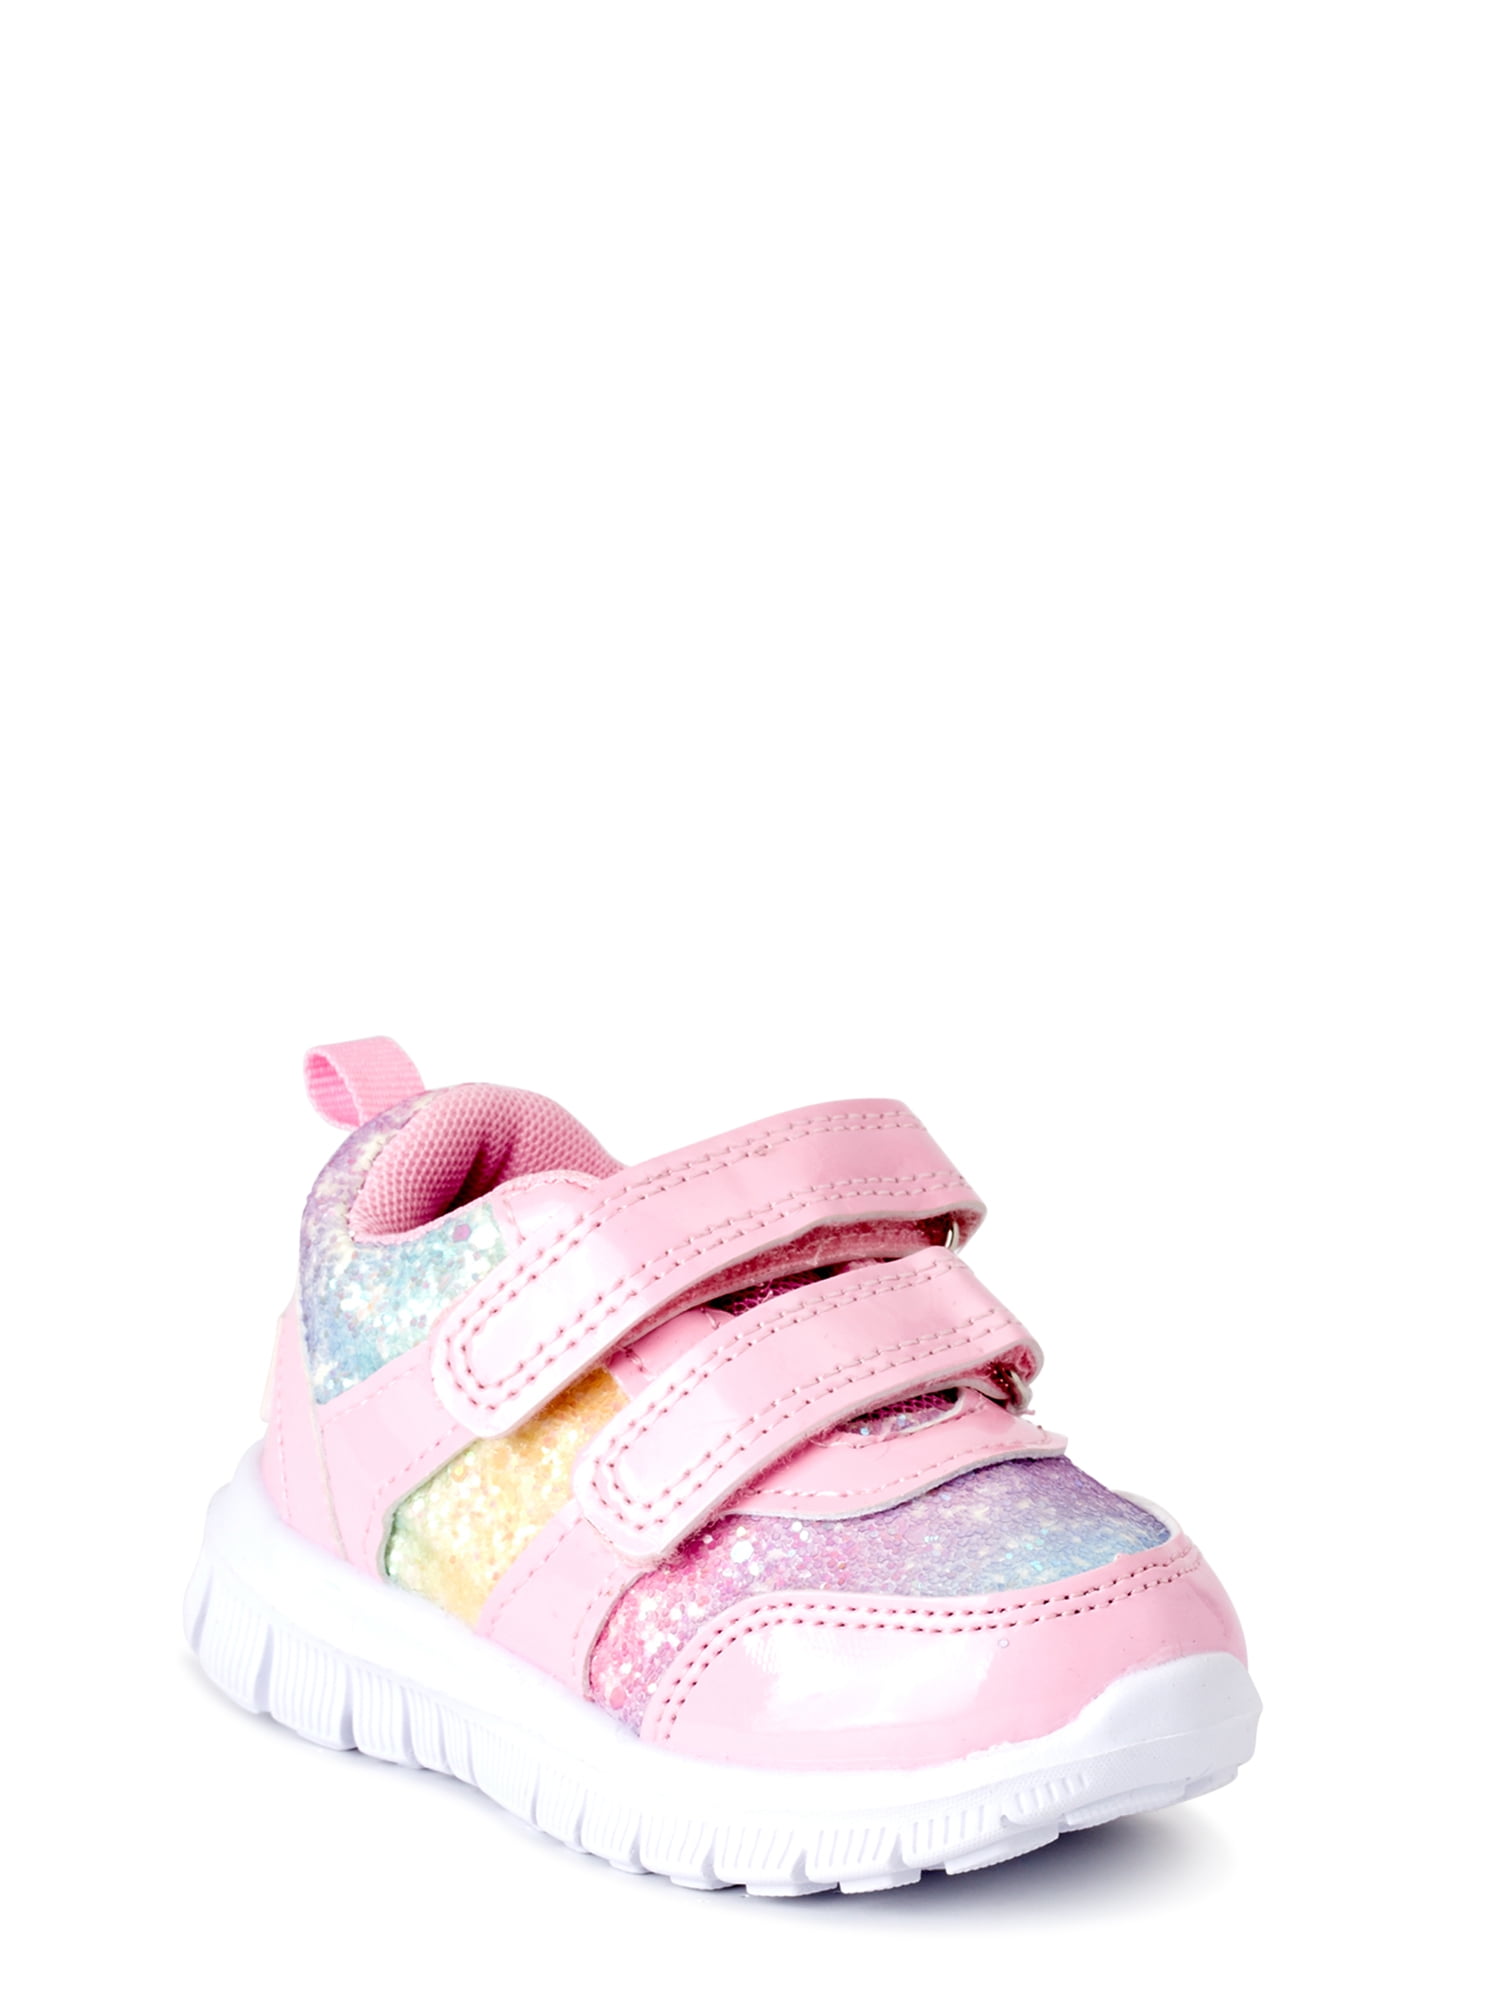 baby girl sneakers size 5